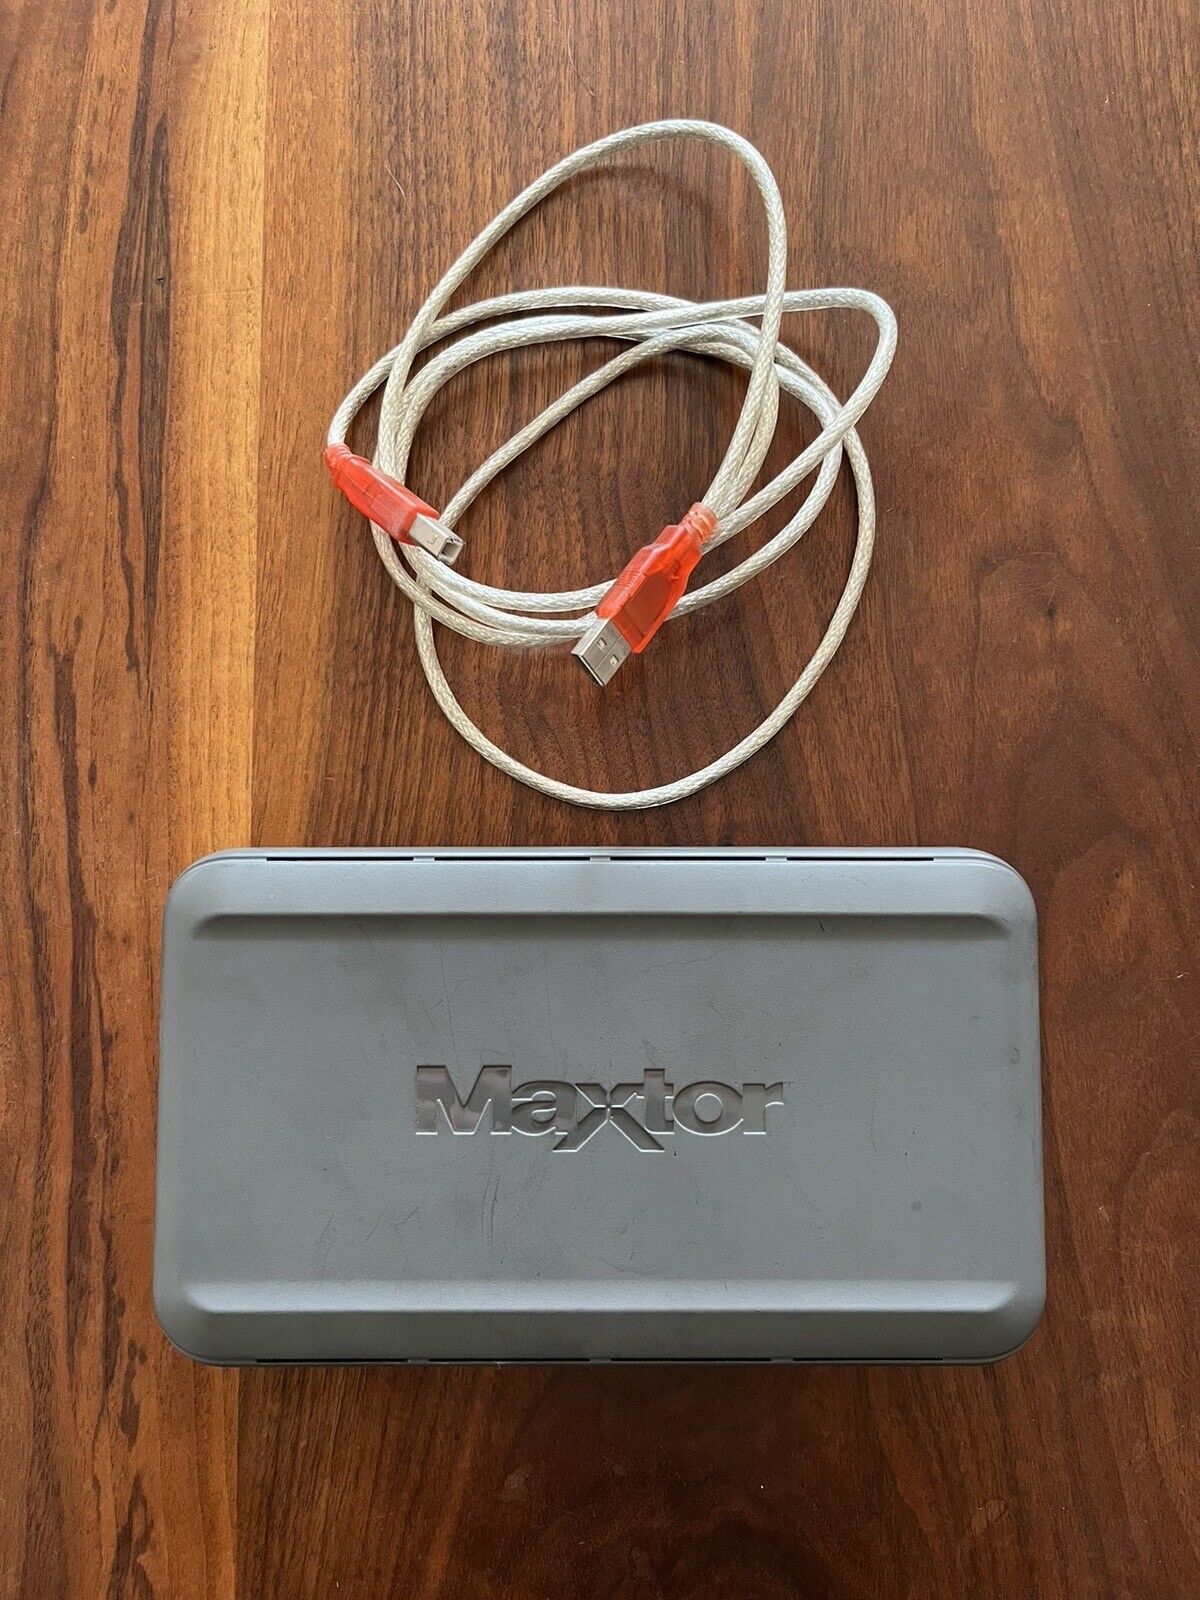 Maxtor Model: Maxtor Personal Storage 320GB Hardrive (tested) w/ USB cable